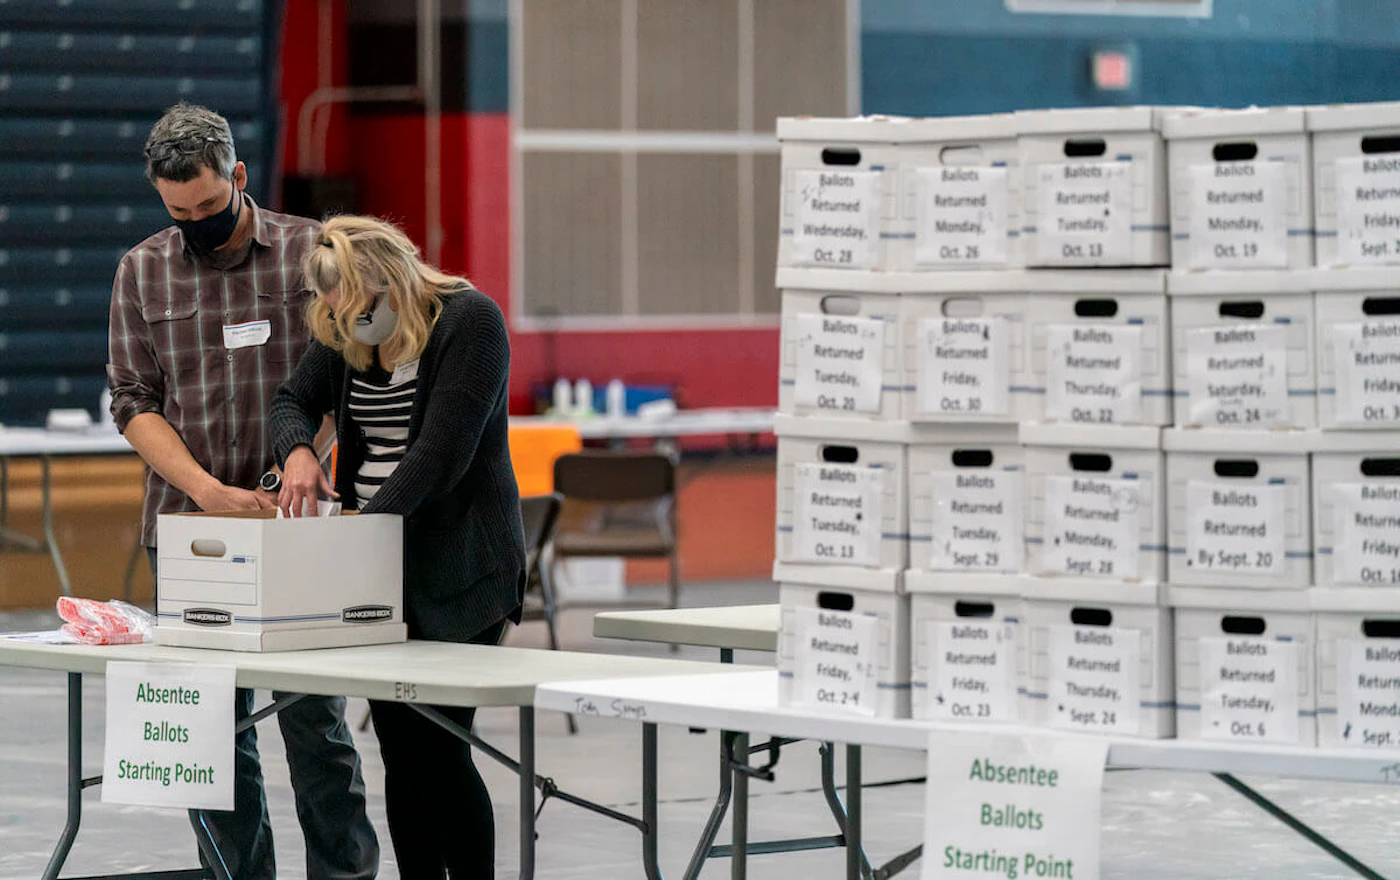 Poll workers Angela and Zach Achten check-in a box of absentee ballots in the gym at Sun Prairie High School on Election Day. The entire gym was dedicated to counting the absentee ballots. The state's top election official again defended the integrity of the ballot-counting and entire election process in Wisconsin Thursday. (Photo by Andy Manis/Getty Images)